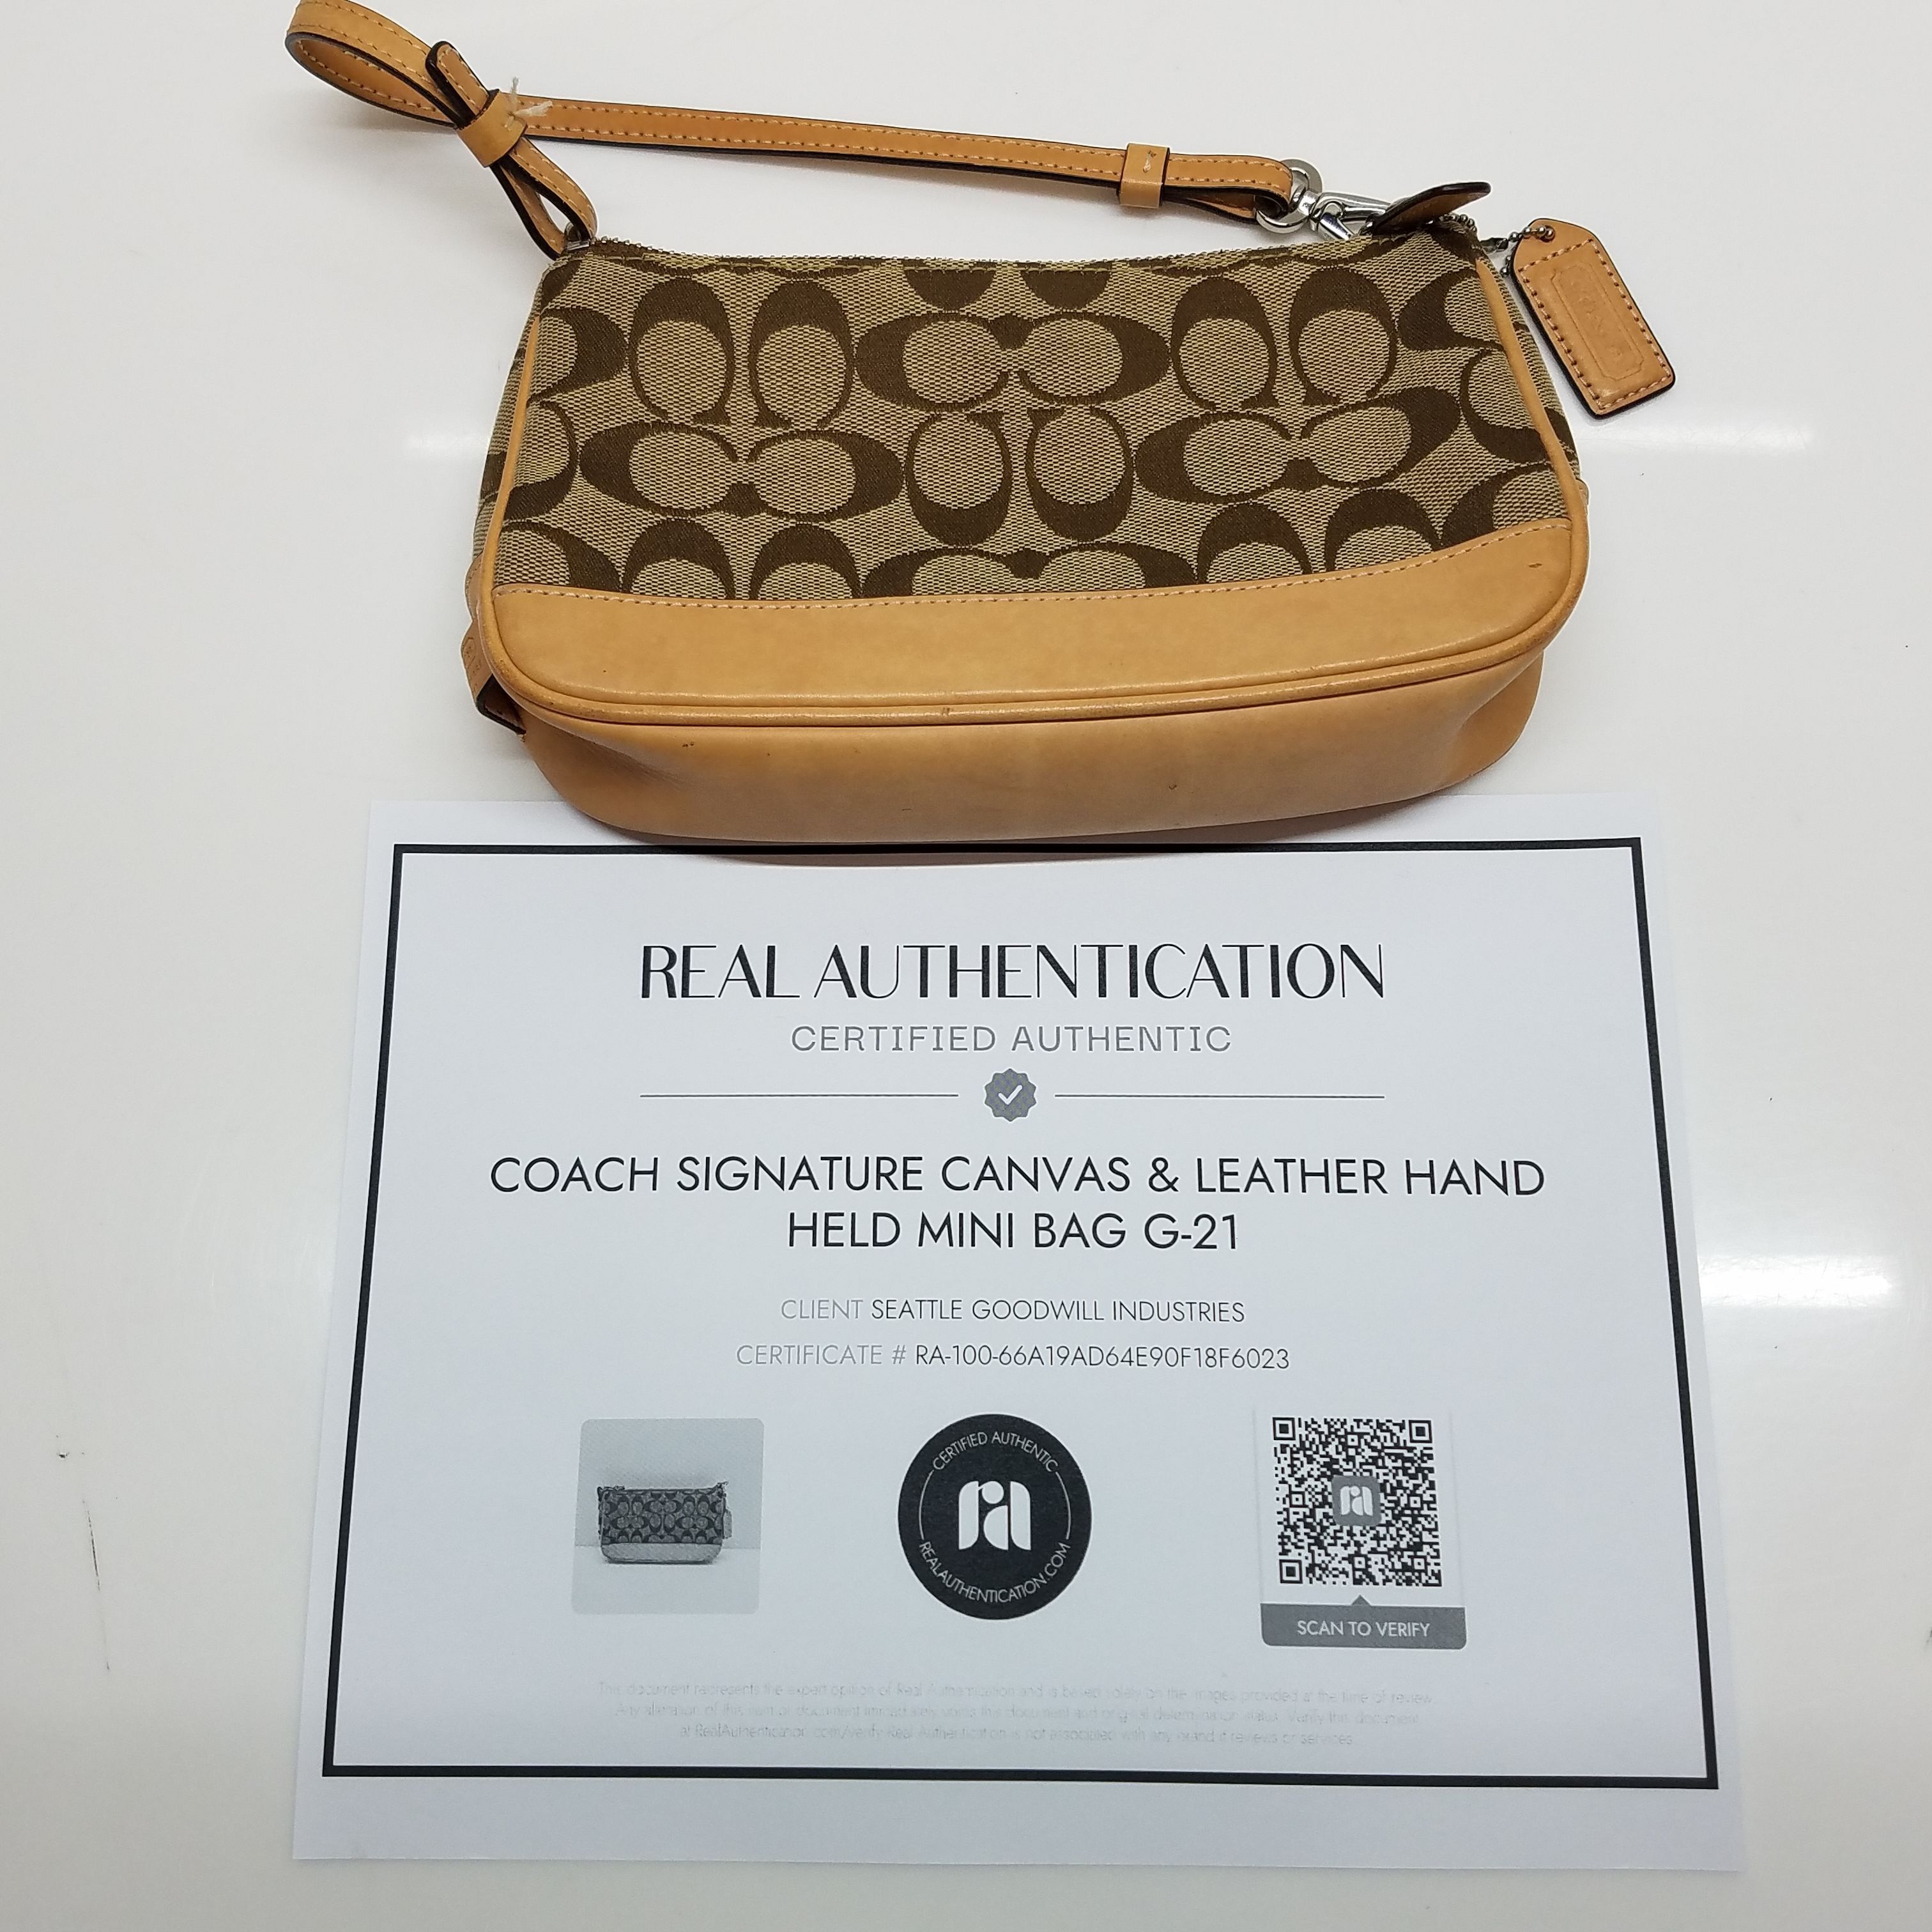 Buy AUTHENTICATED Coach Signature Canvas and Leather Hand Held Mini Bag for  USD 59.99 | GoodwillFinds